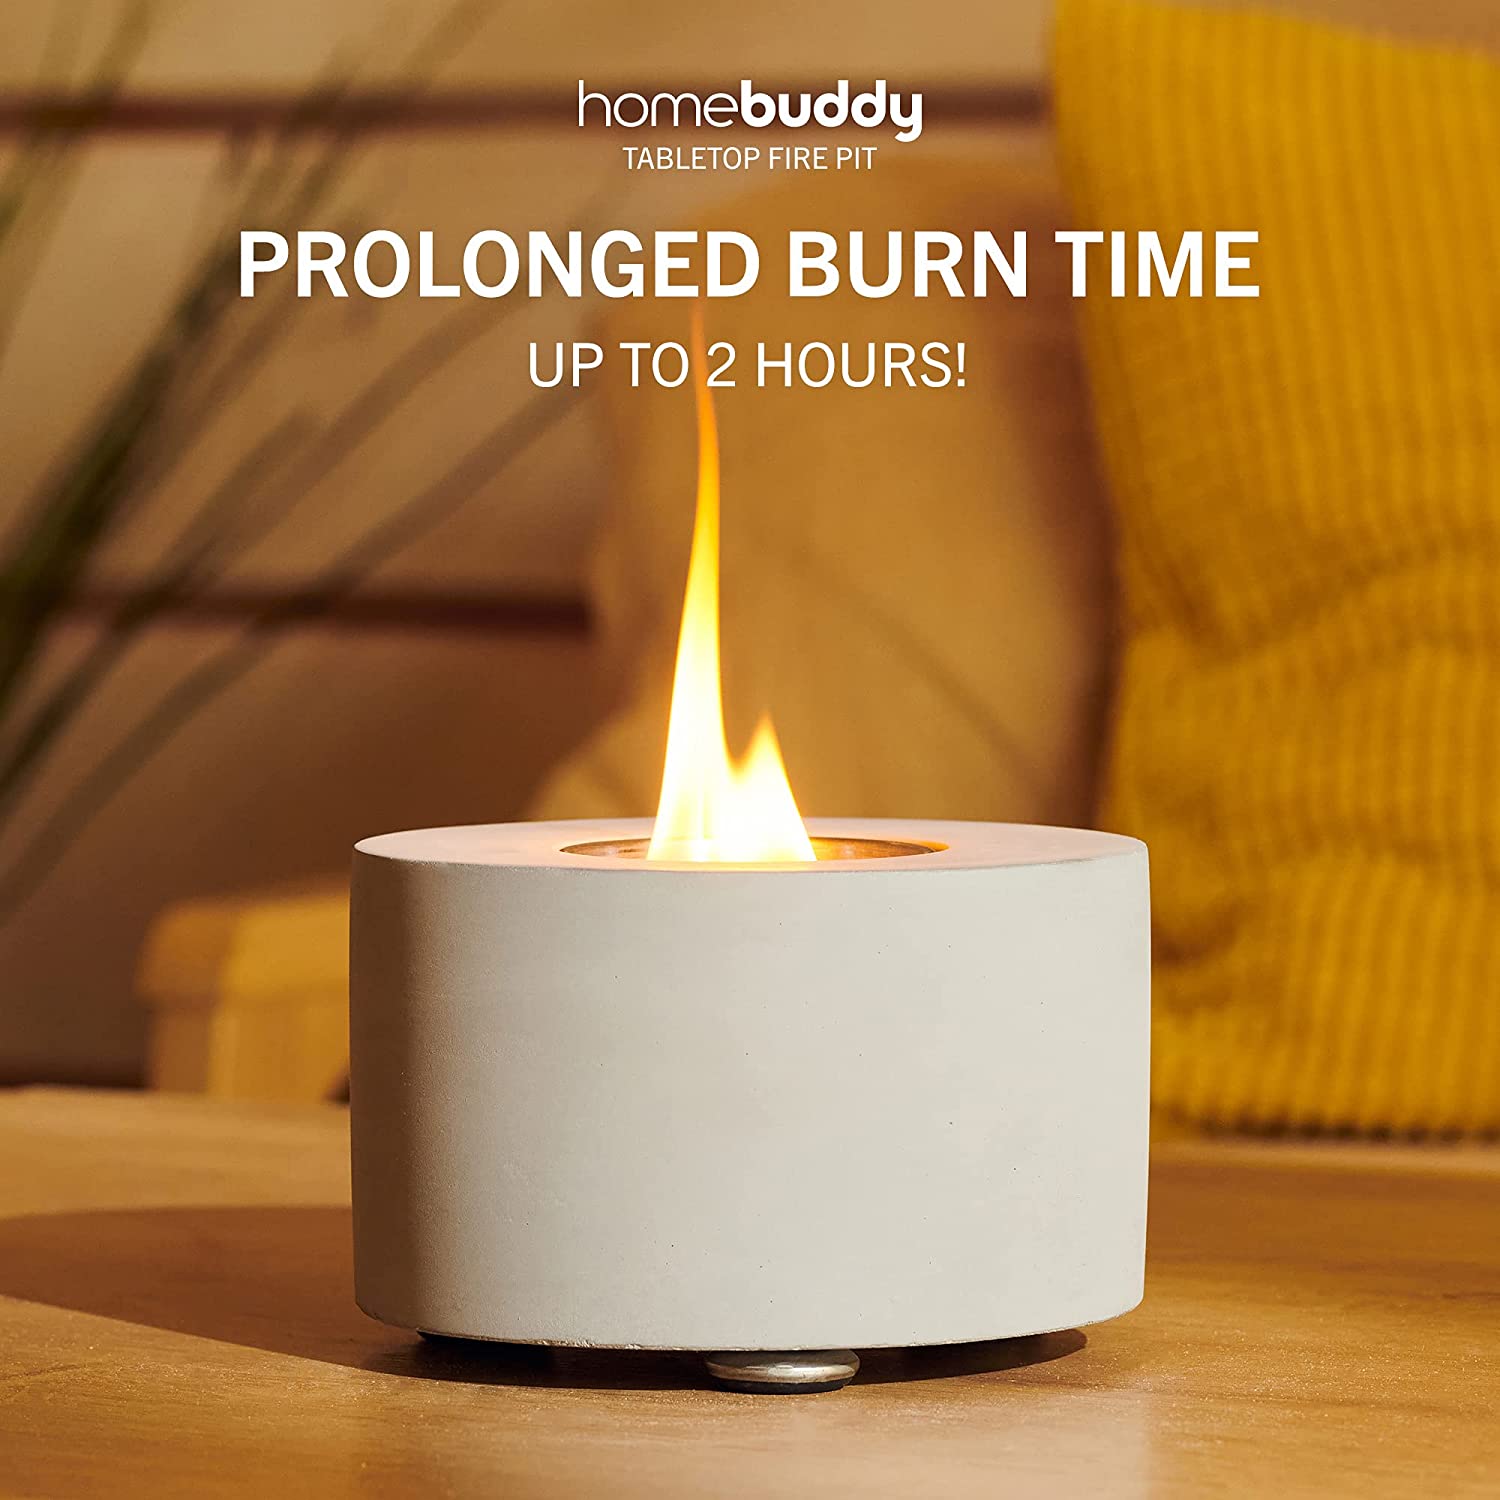 A stylish white mini table top fireplace which is lit up with a flame in the centre. There is text which reads, 'prolonged burn time up to 2 hours.'